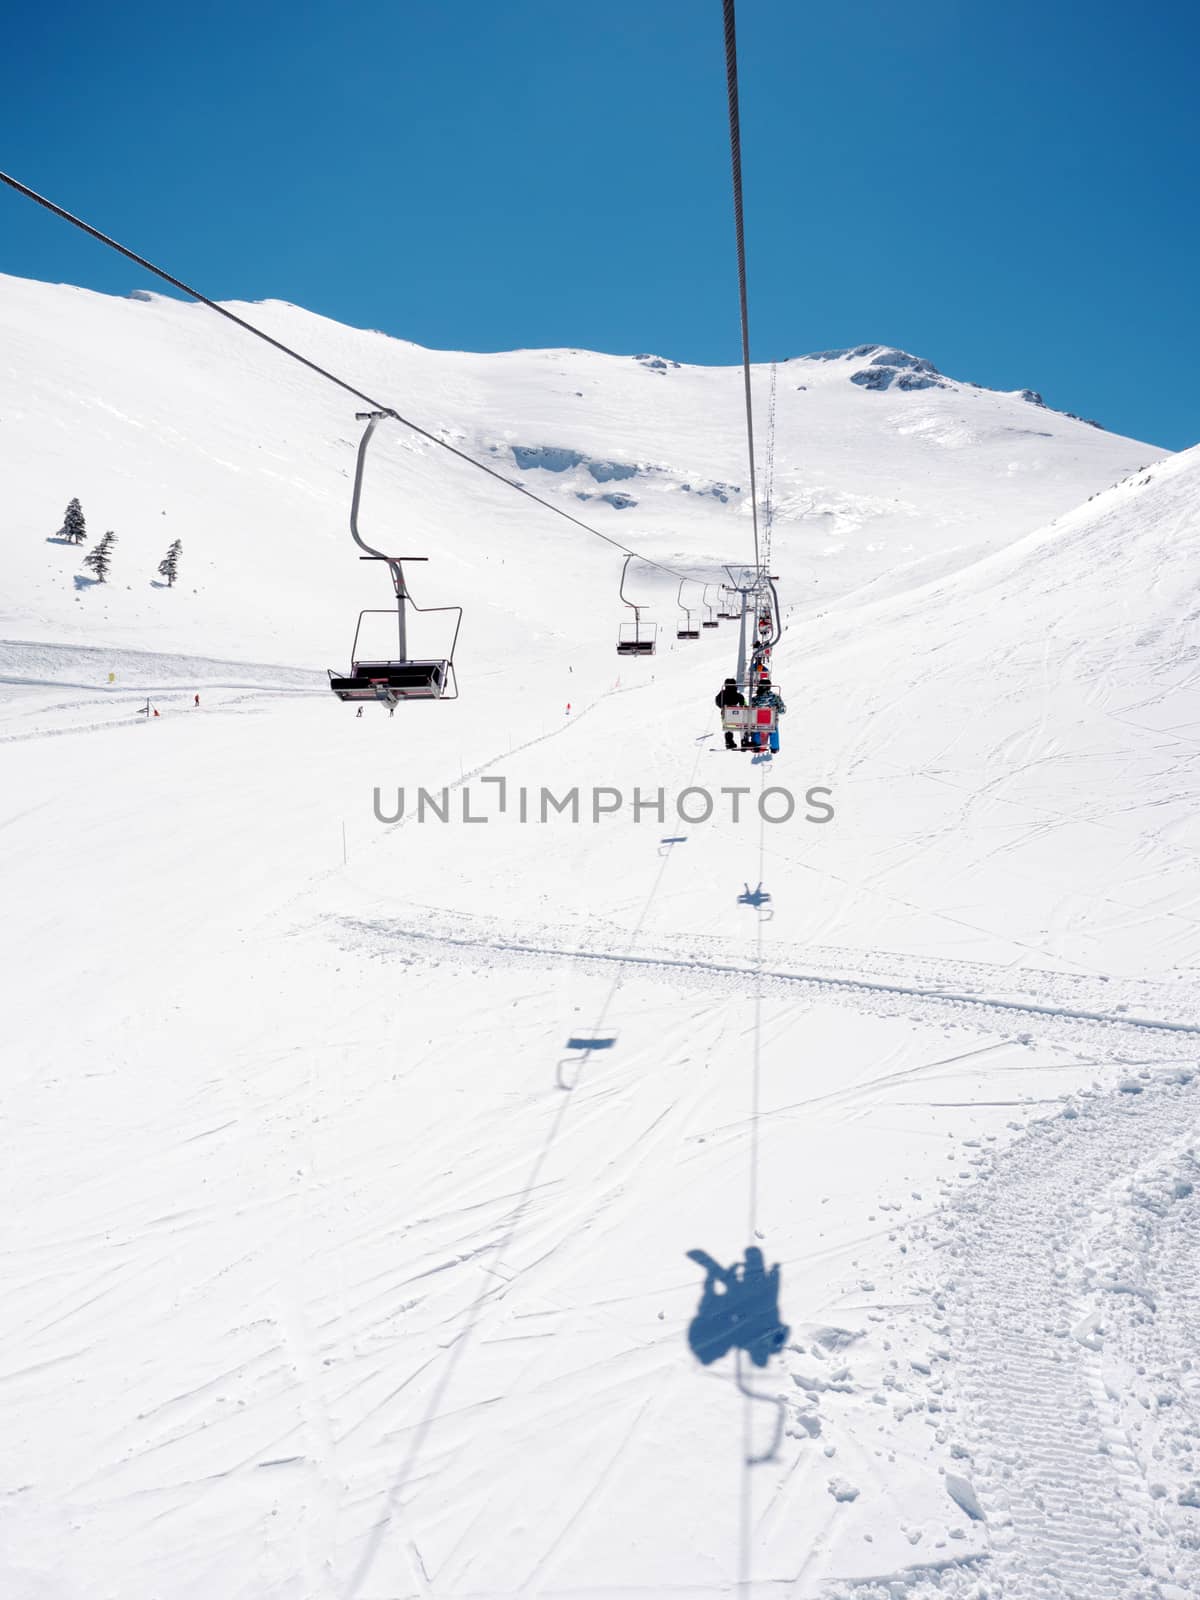 View from the lift of Kalavrita ski resort with people on the slopes in a sunny day